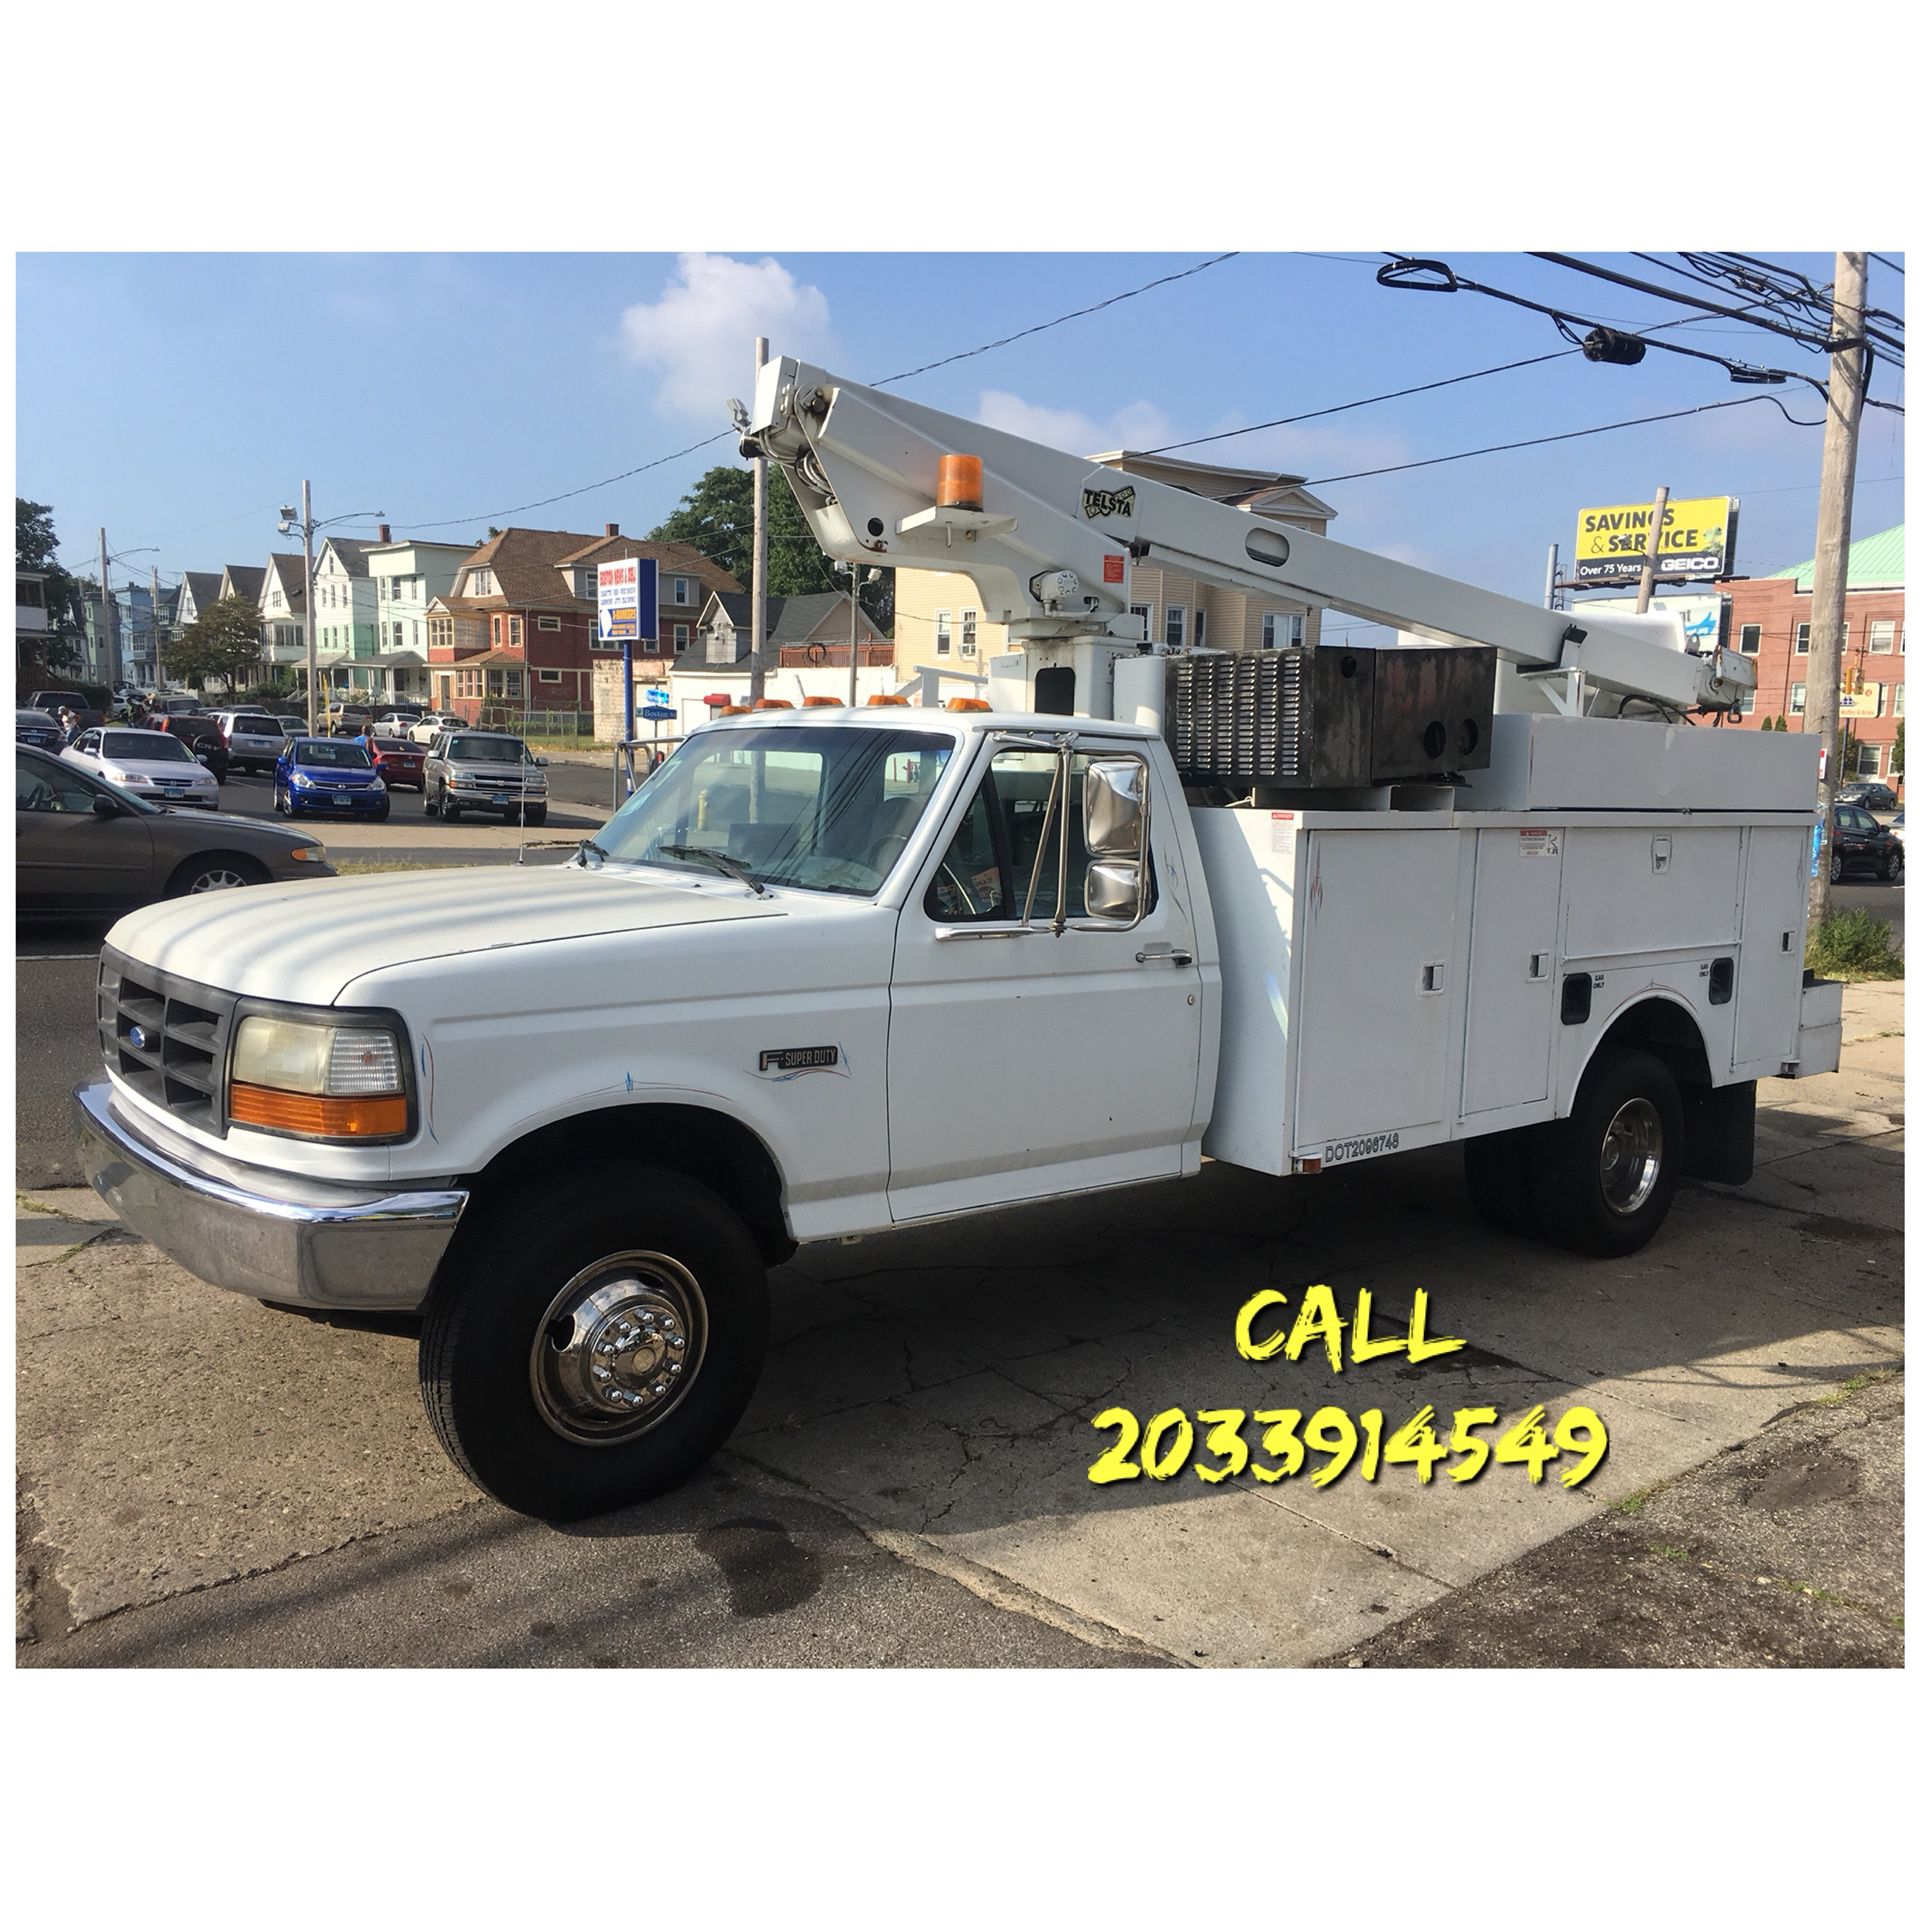 1997 FORD F450 BUCKET TRUCK AUTO 105,000 MILES ONLY RUNS GOOD